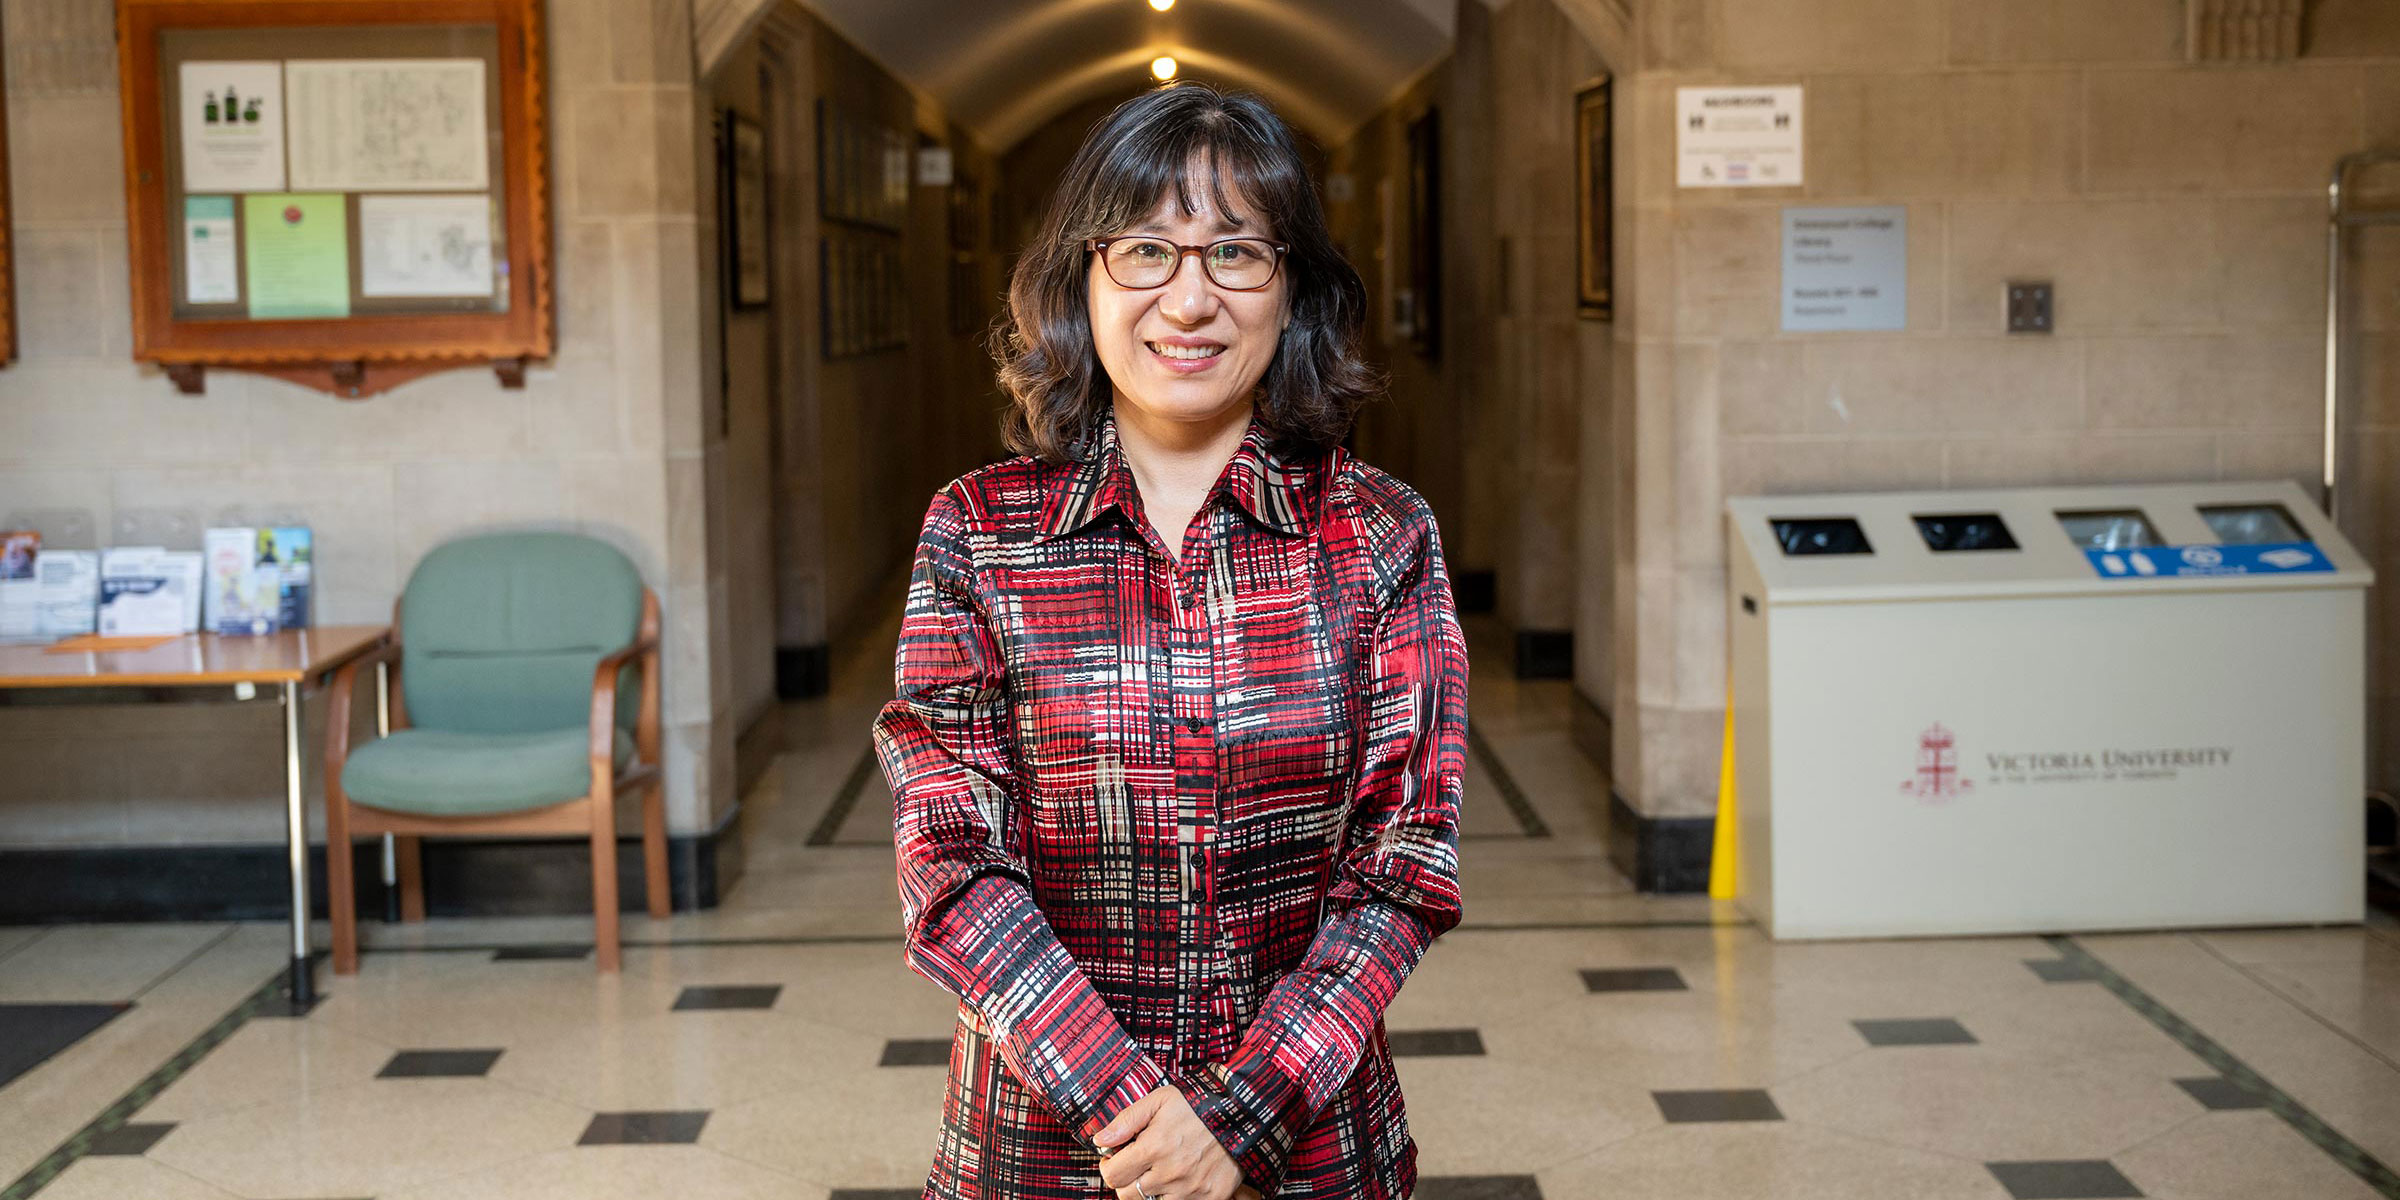 Principal Kim-Cragg stands in the hallway of the Emmanuel College building